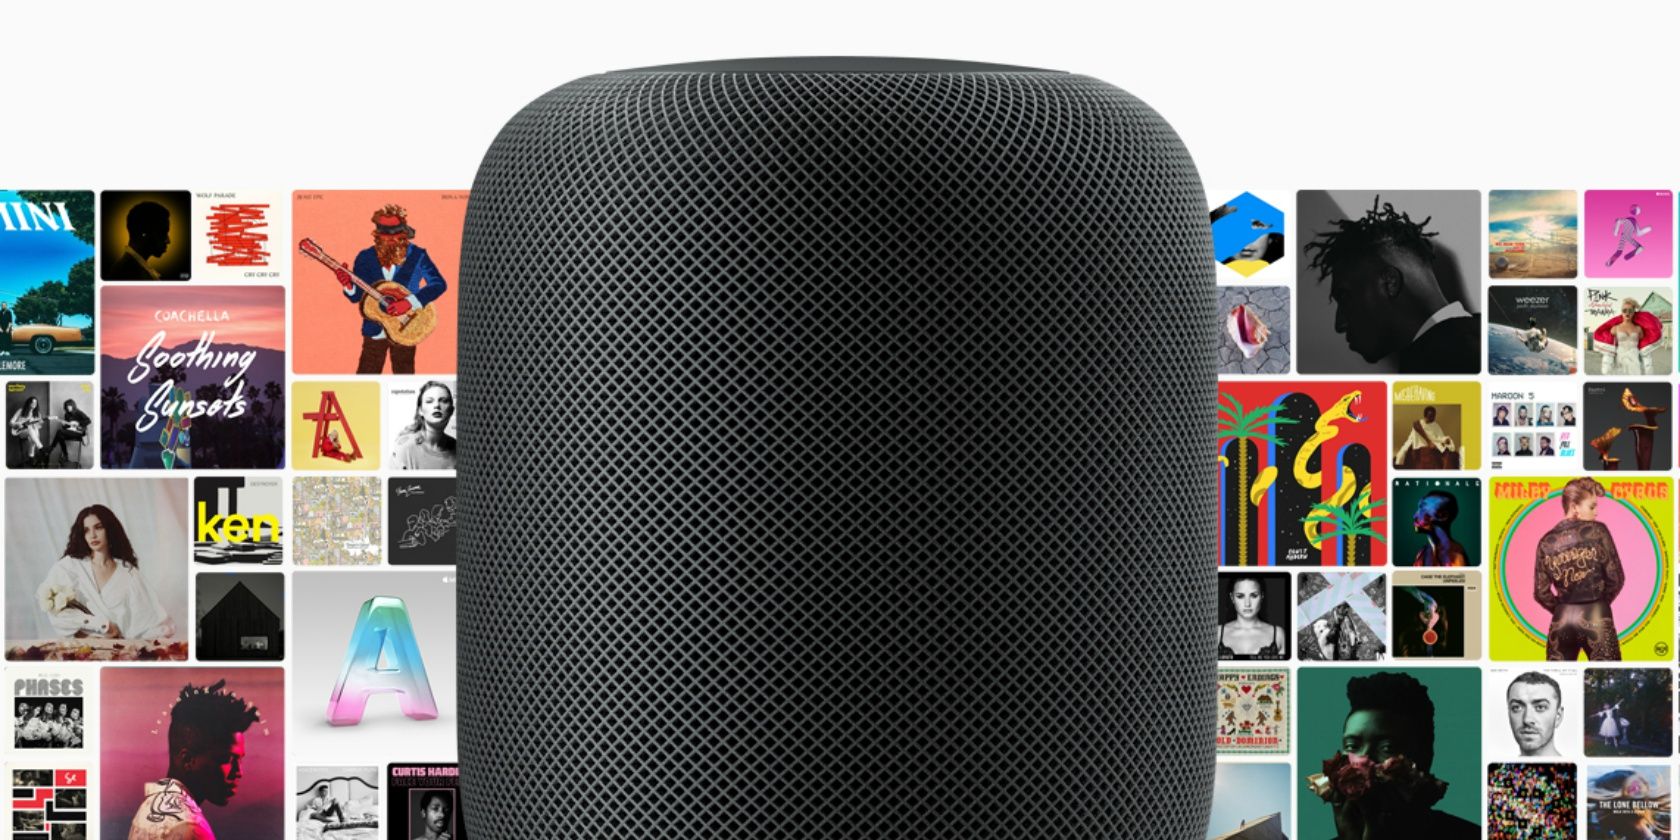 Apple Discontinues the HomePod to Focus on the HomePod mini Instead